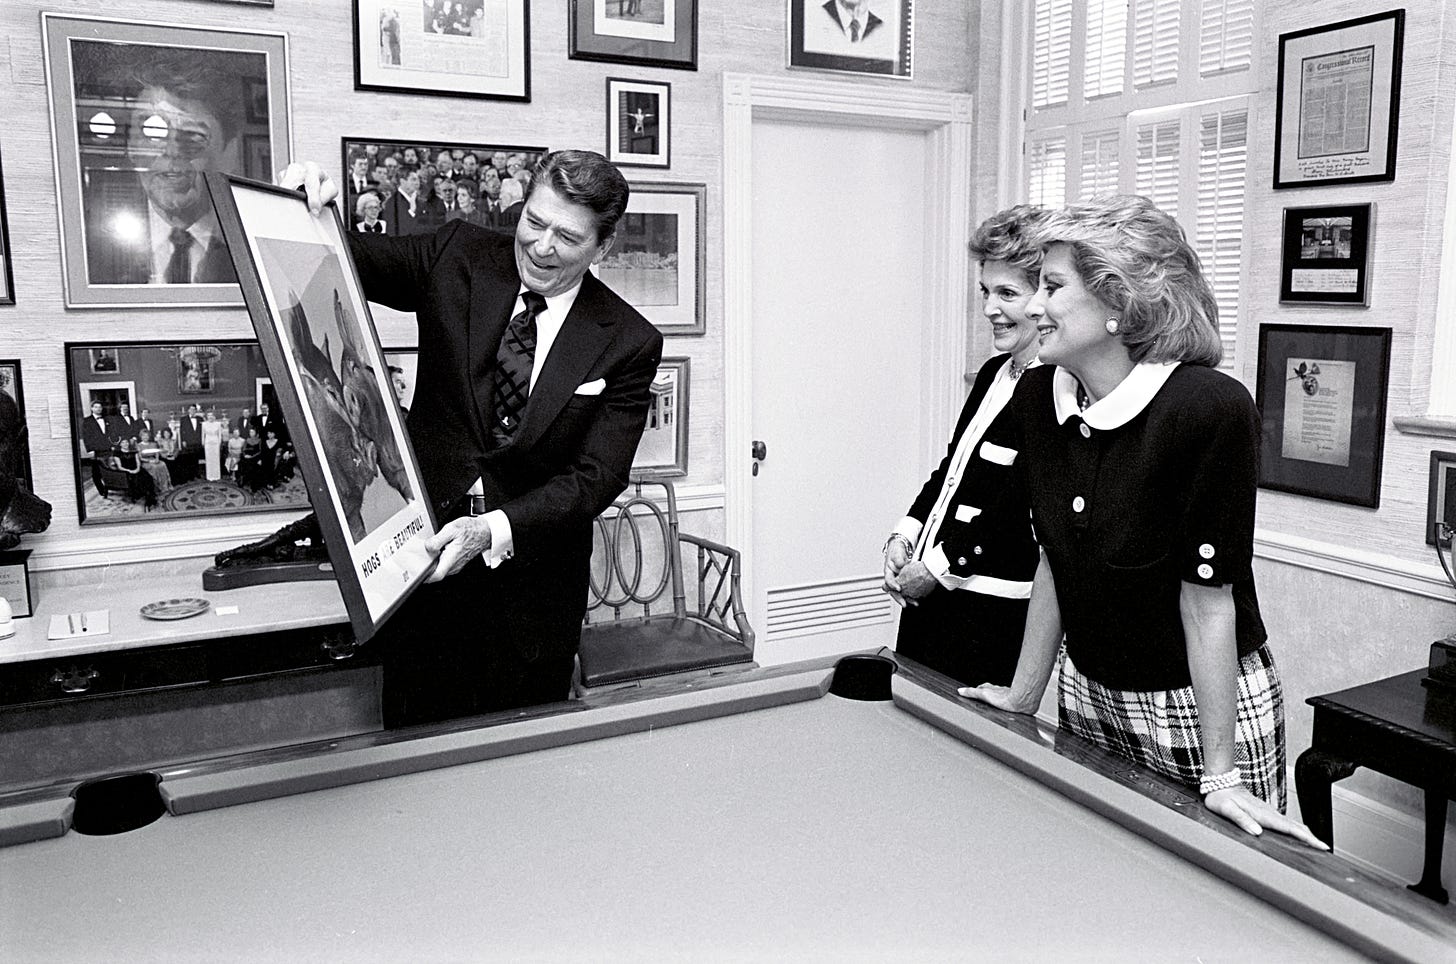 File:President Ronald Reagan and Nancy Reagan in the gaming room during an  interview with Barbara Walters.jpg - Wikimedia Commons